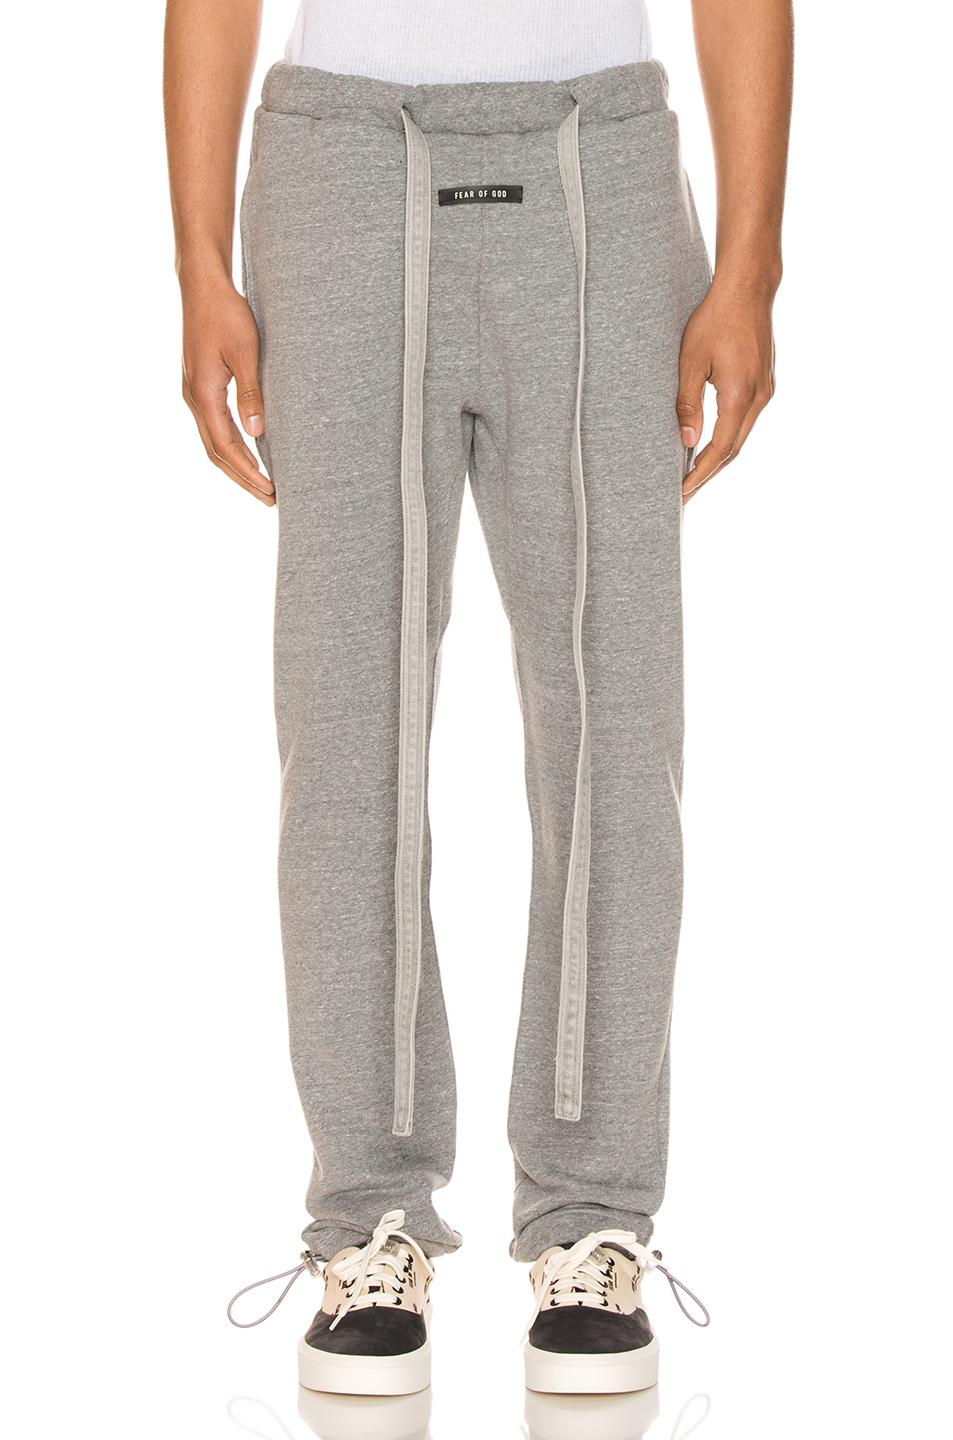 Fear Of God Cotton Core Sweatpant in Heather Grey (Gray) for Men - Lyst